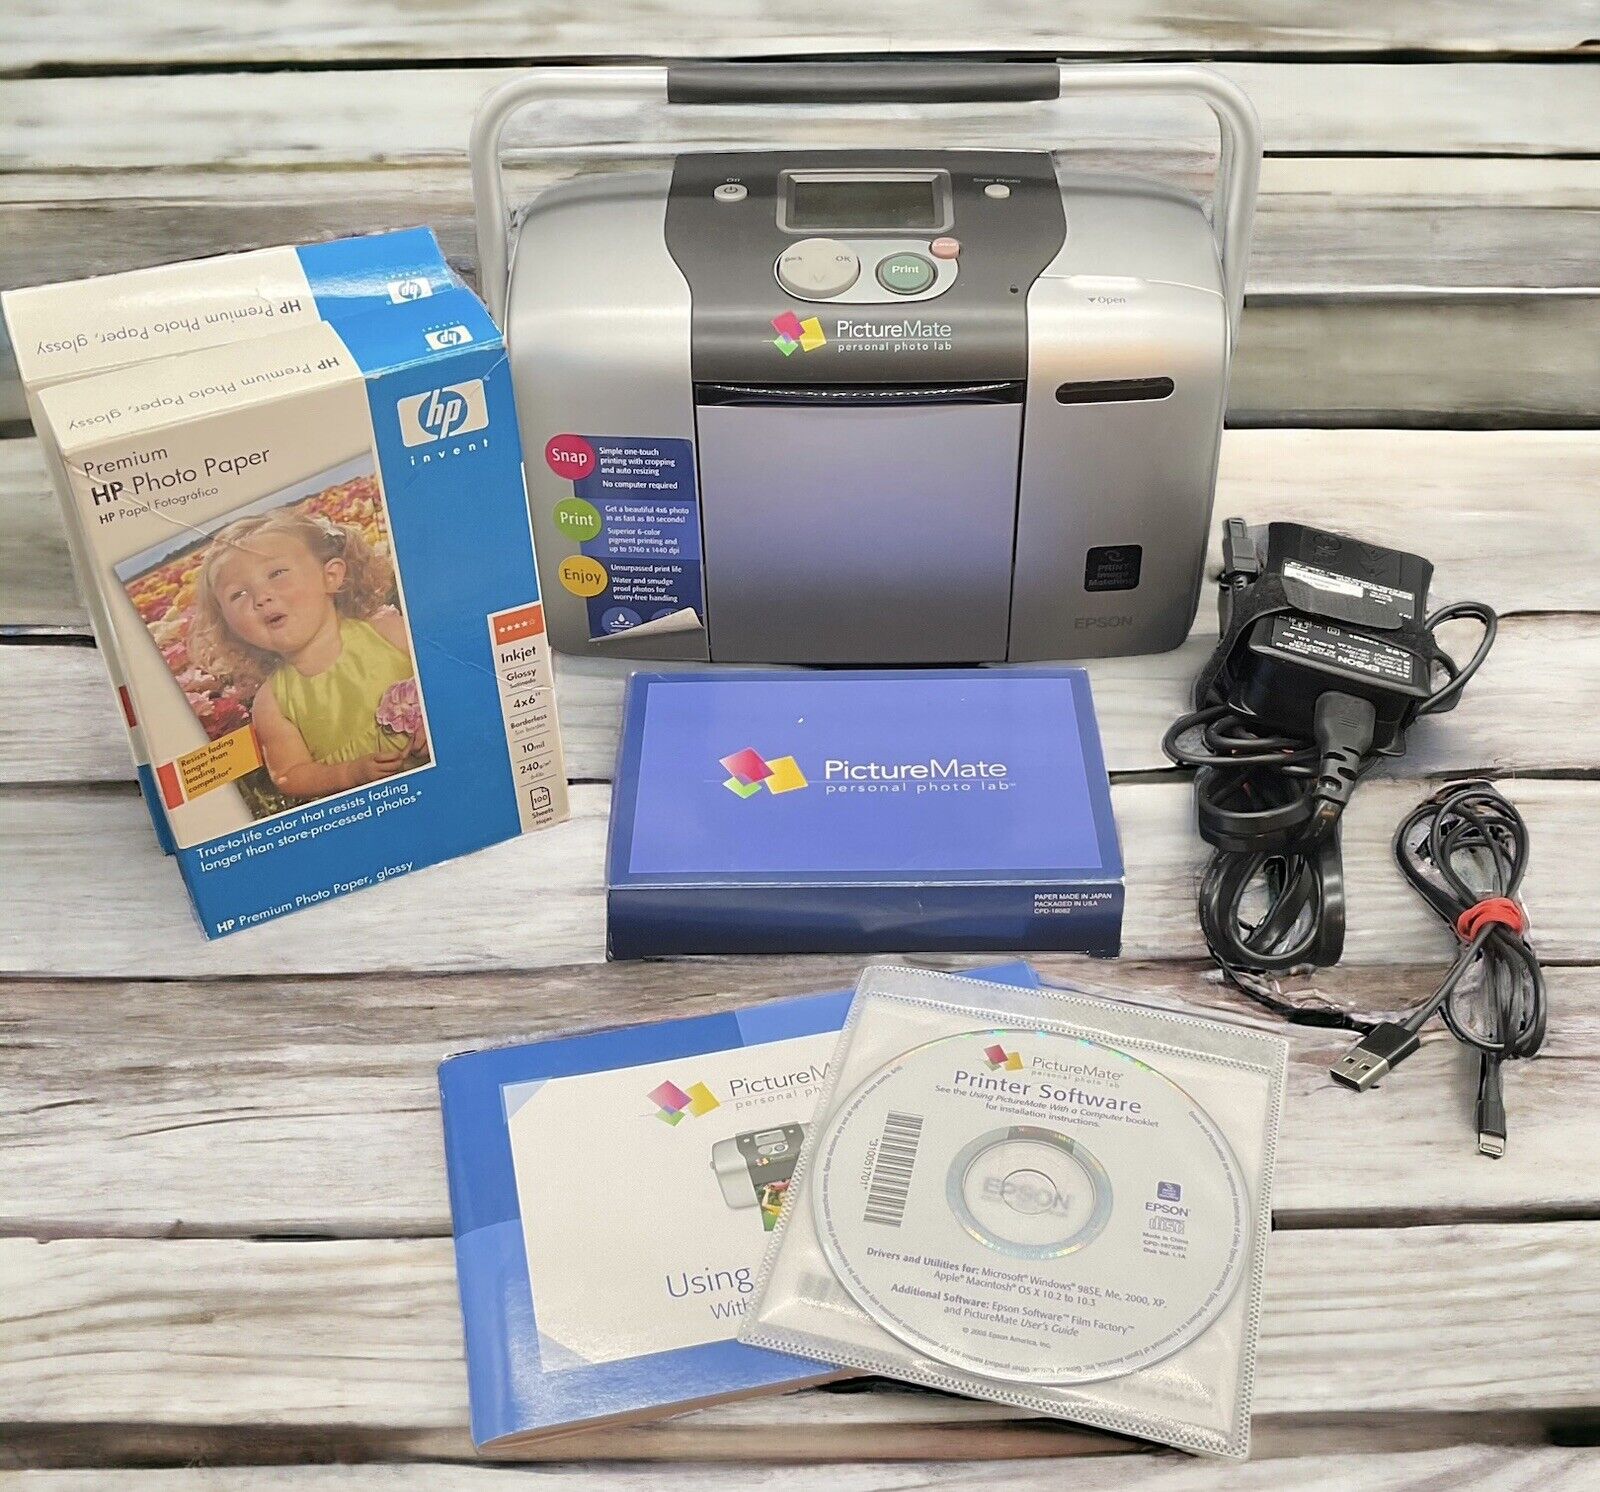 Epson Picture Mate Personal Photo Lab Home Picture Printer Model B271A Complete